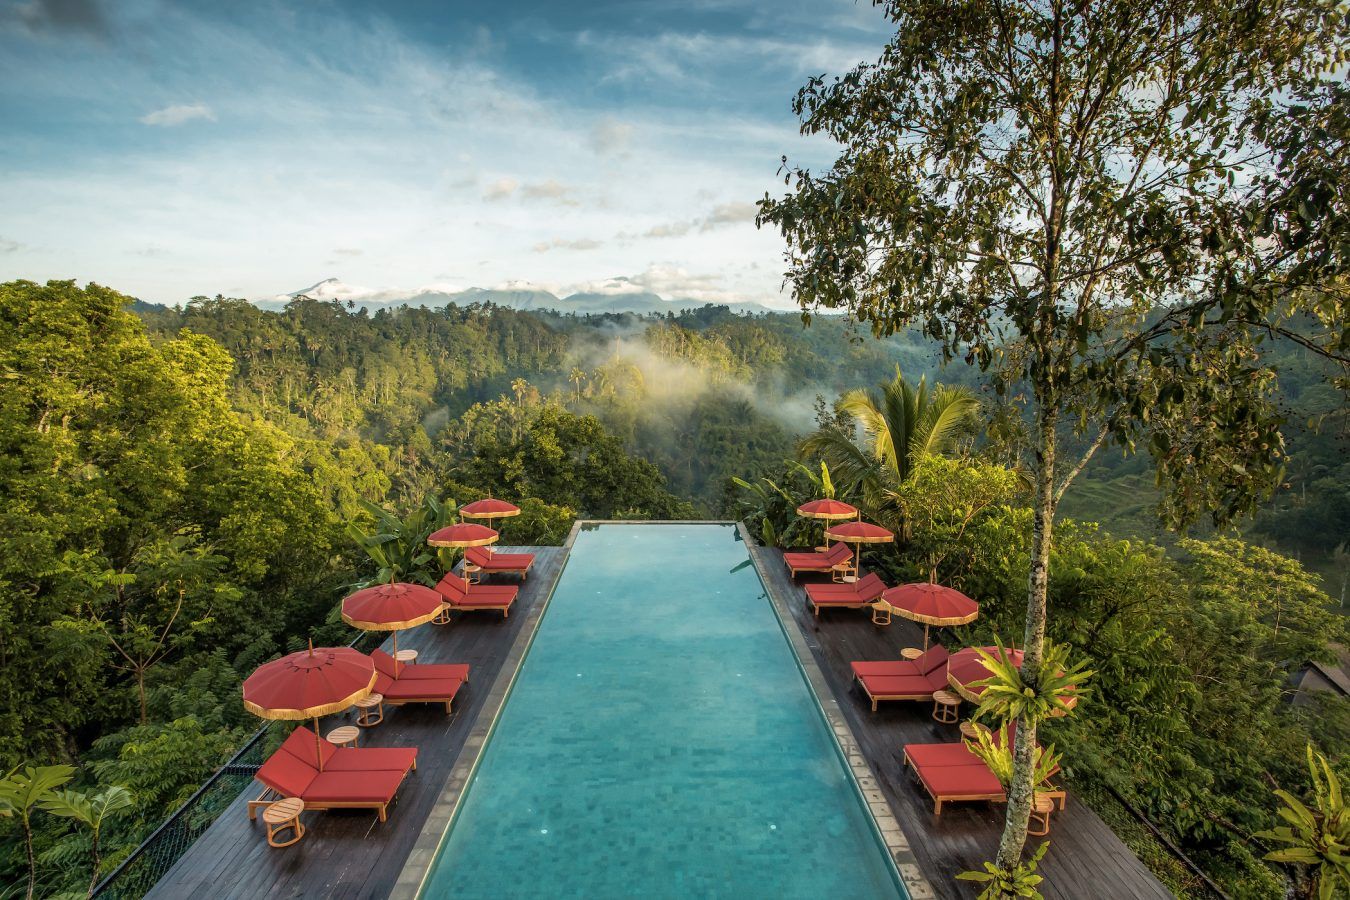 5 new hotels and resorts in Bali to book for your next weekend getaway